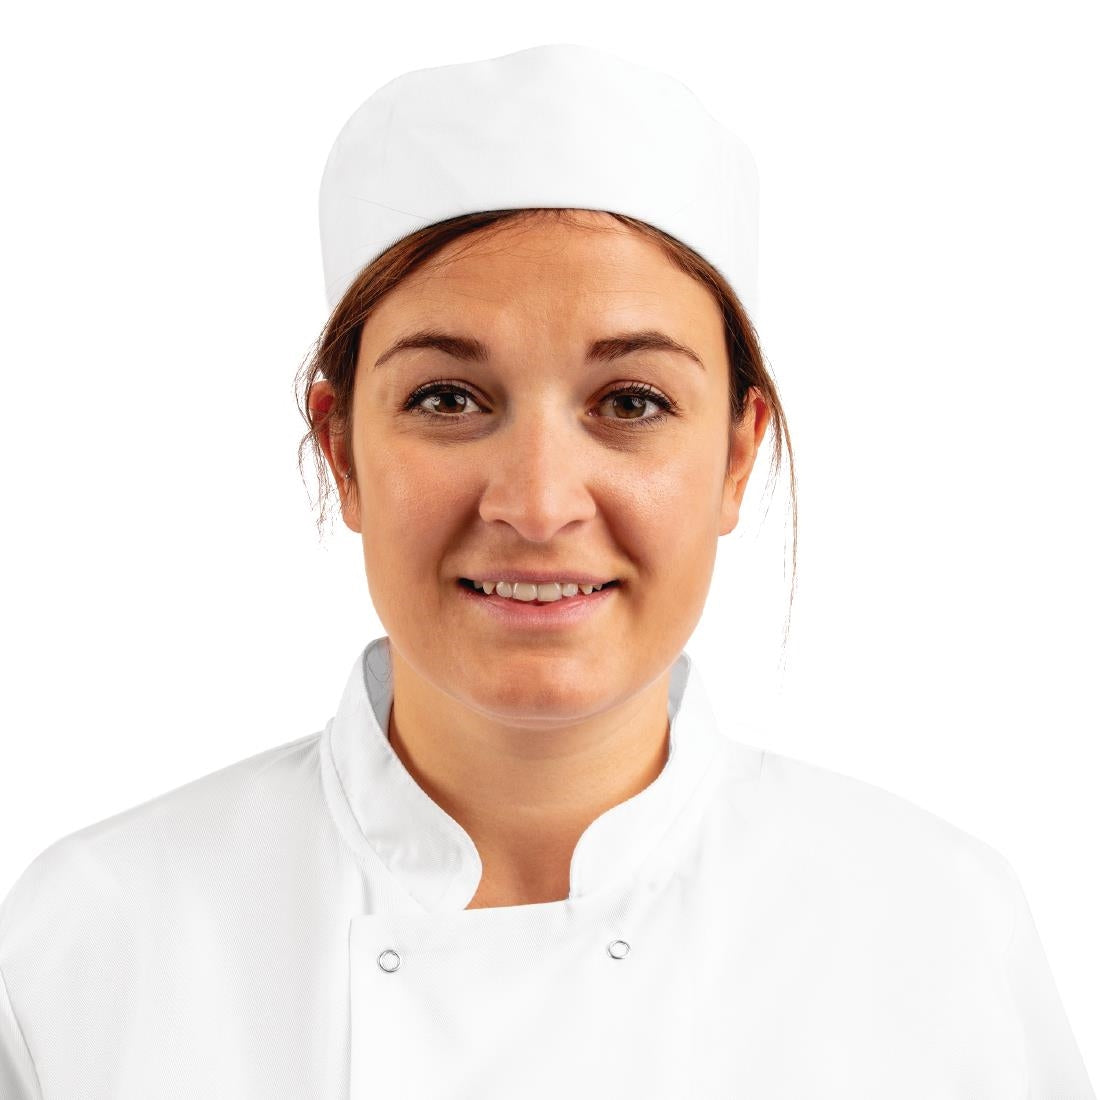 A203-XL Whites Chefs Unisex Skull Cap Polycotton White - XL JD Catering Equipment Solutions Ltd